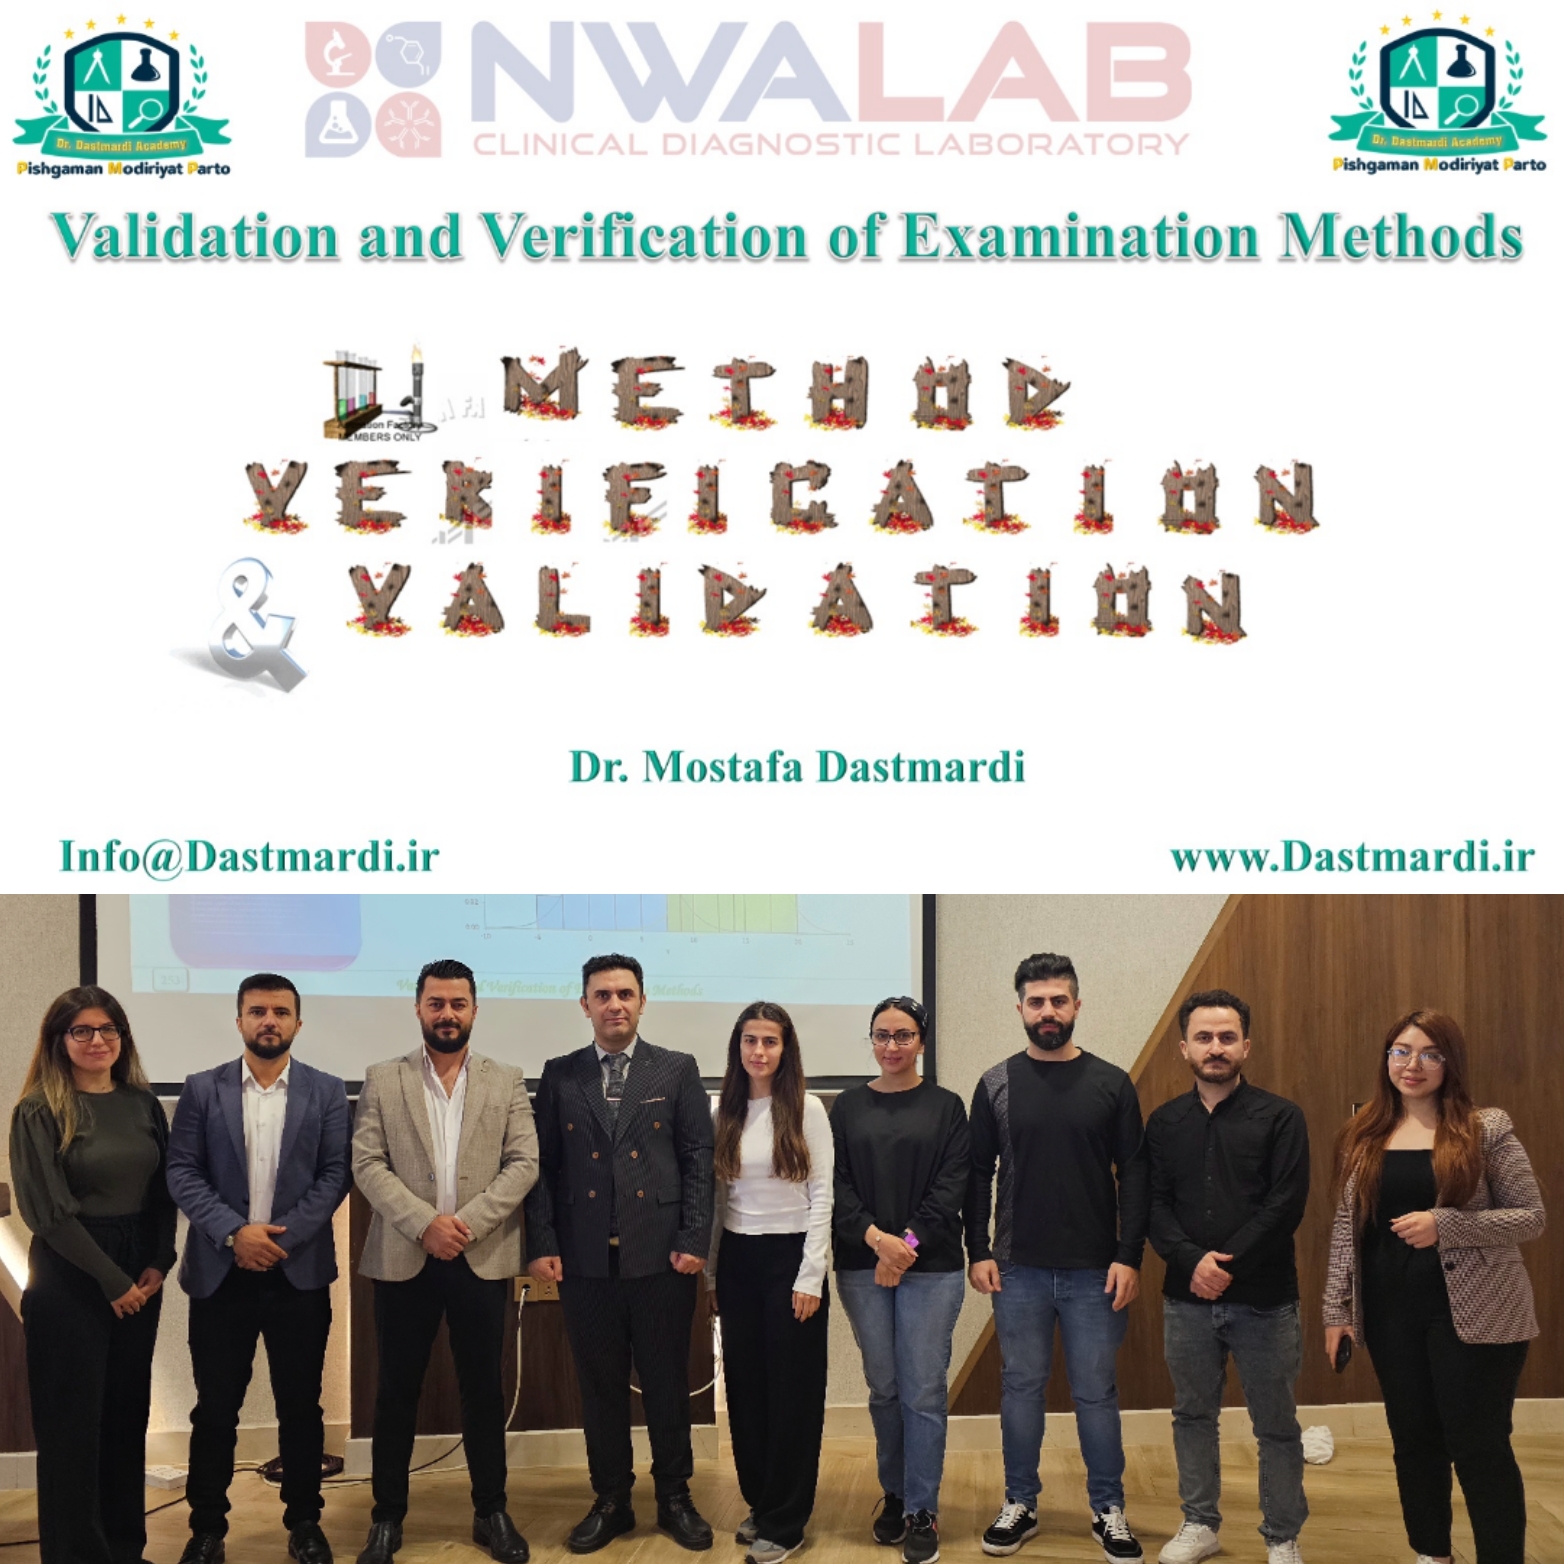 Verification and Validation of Examination Methods in Medical Laboratories Training Course